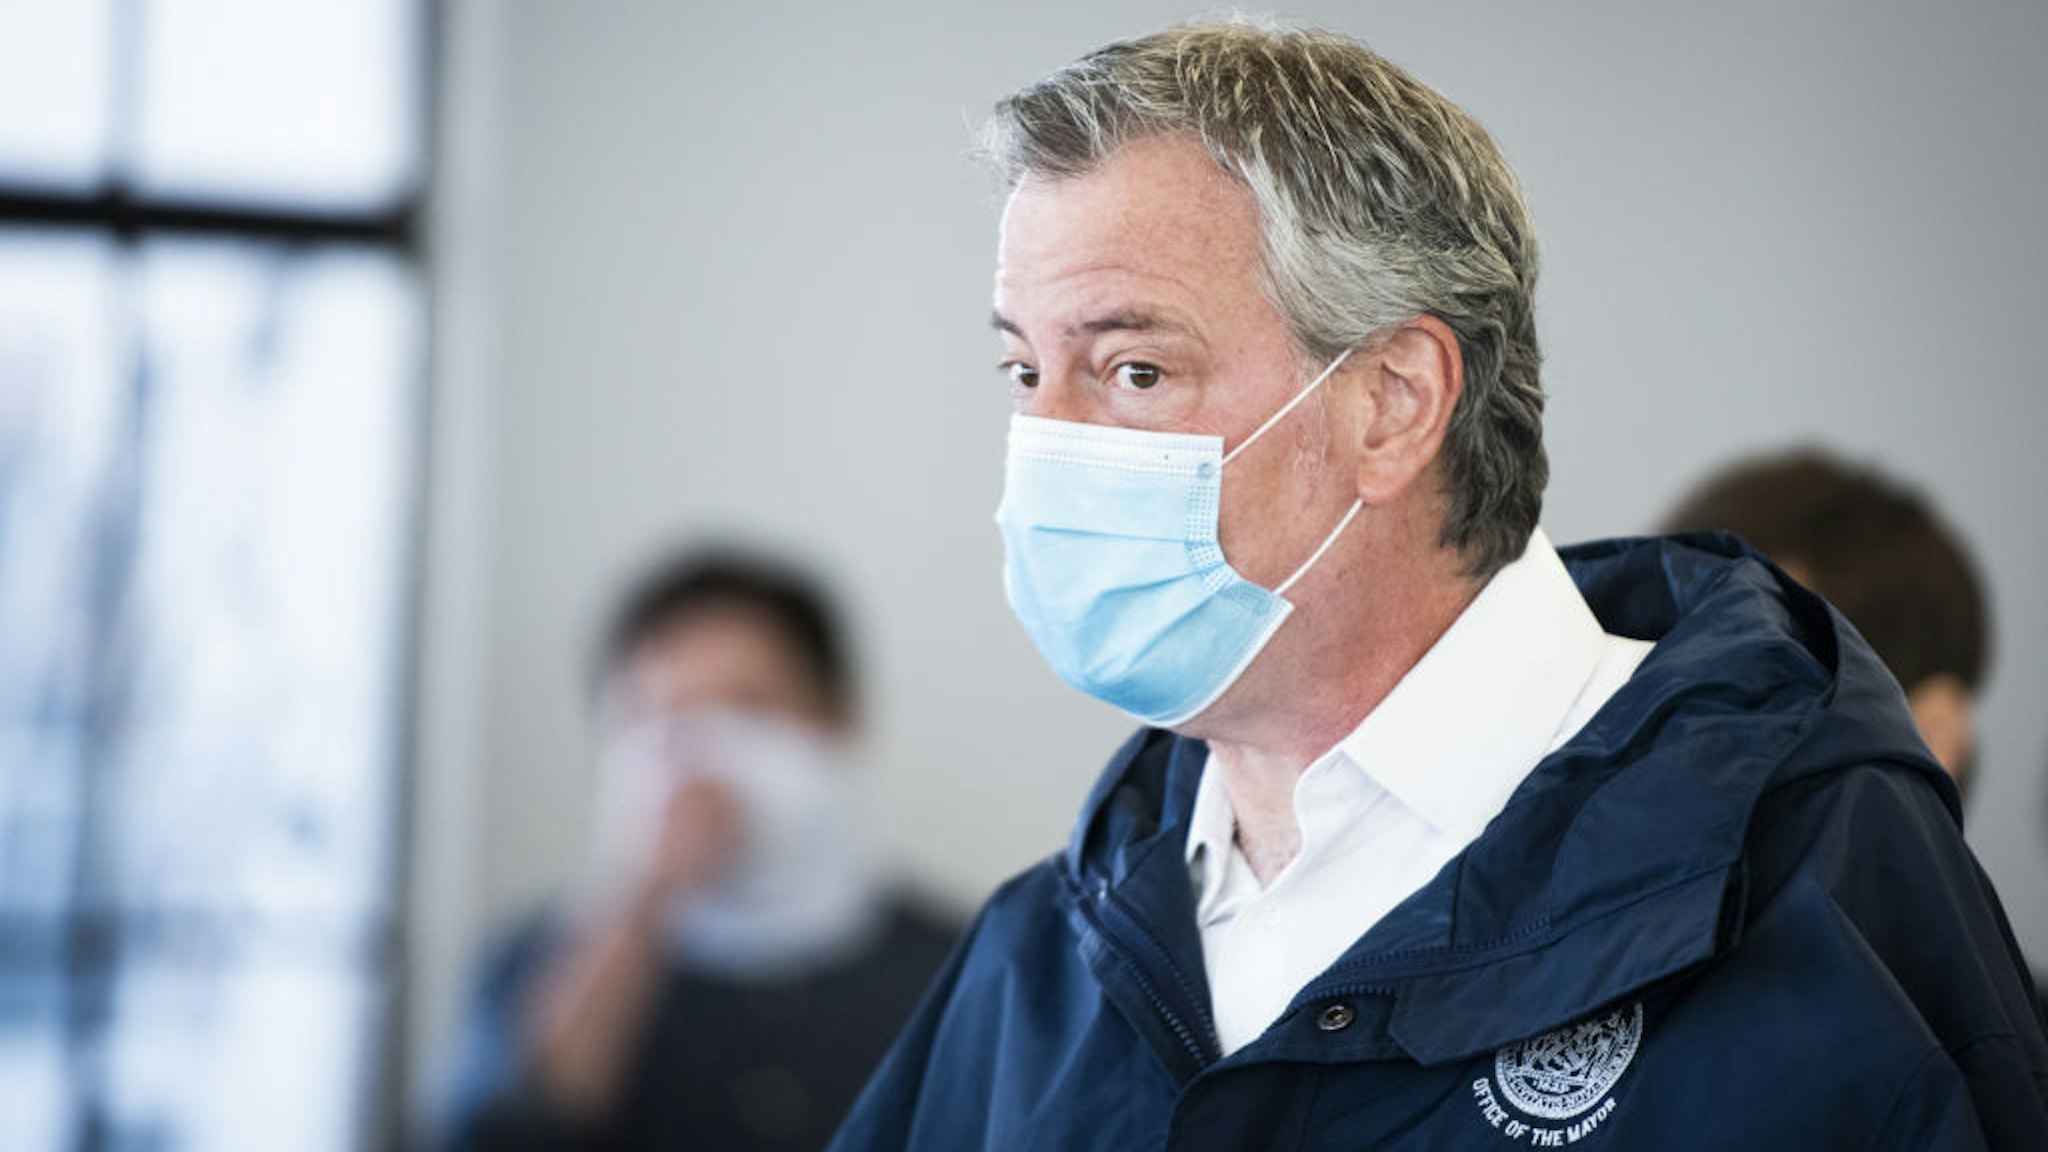 Bill de Blasio, mayor of New York, wears a protective mask while touring the Malia Mills swimwear factory, which has pivoted to manufacturing polypropylene gowns for medical workers, in the Brooklyn borough of New York, U.S., on Wednesday, April 22, 2020. New York City officials intend to enlist thousands of health-care workers next month to conduct hundreds of thousands of diagnostic tests a day, and isolating anyone found to be carrying the disease. Photographer: Mark Kauzlarich/Bloomberg via Getty Images